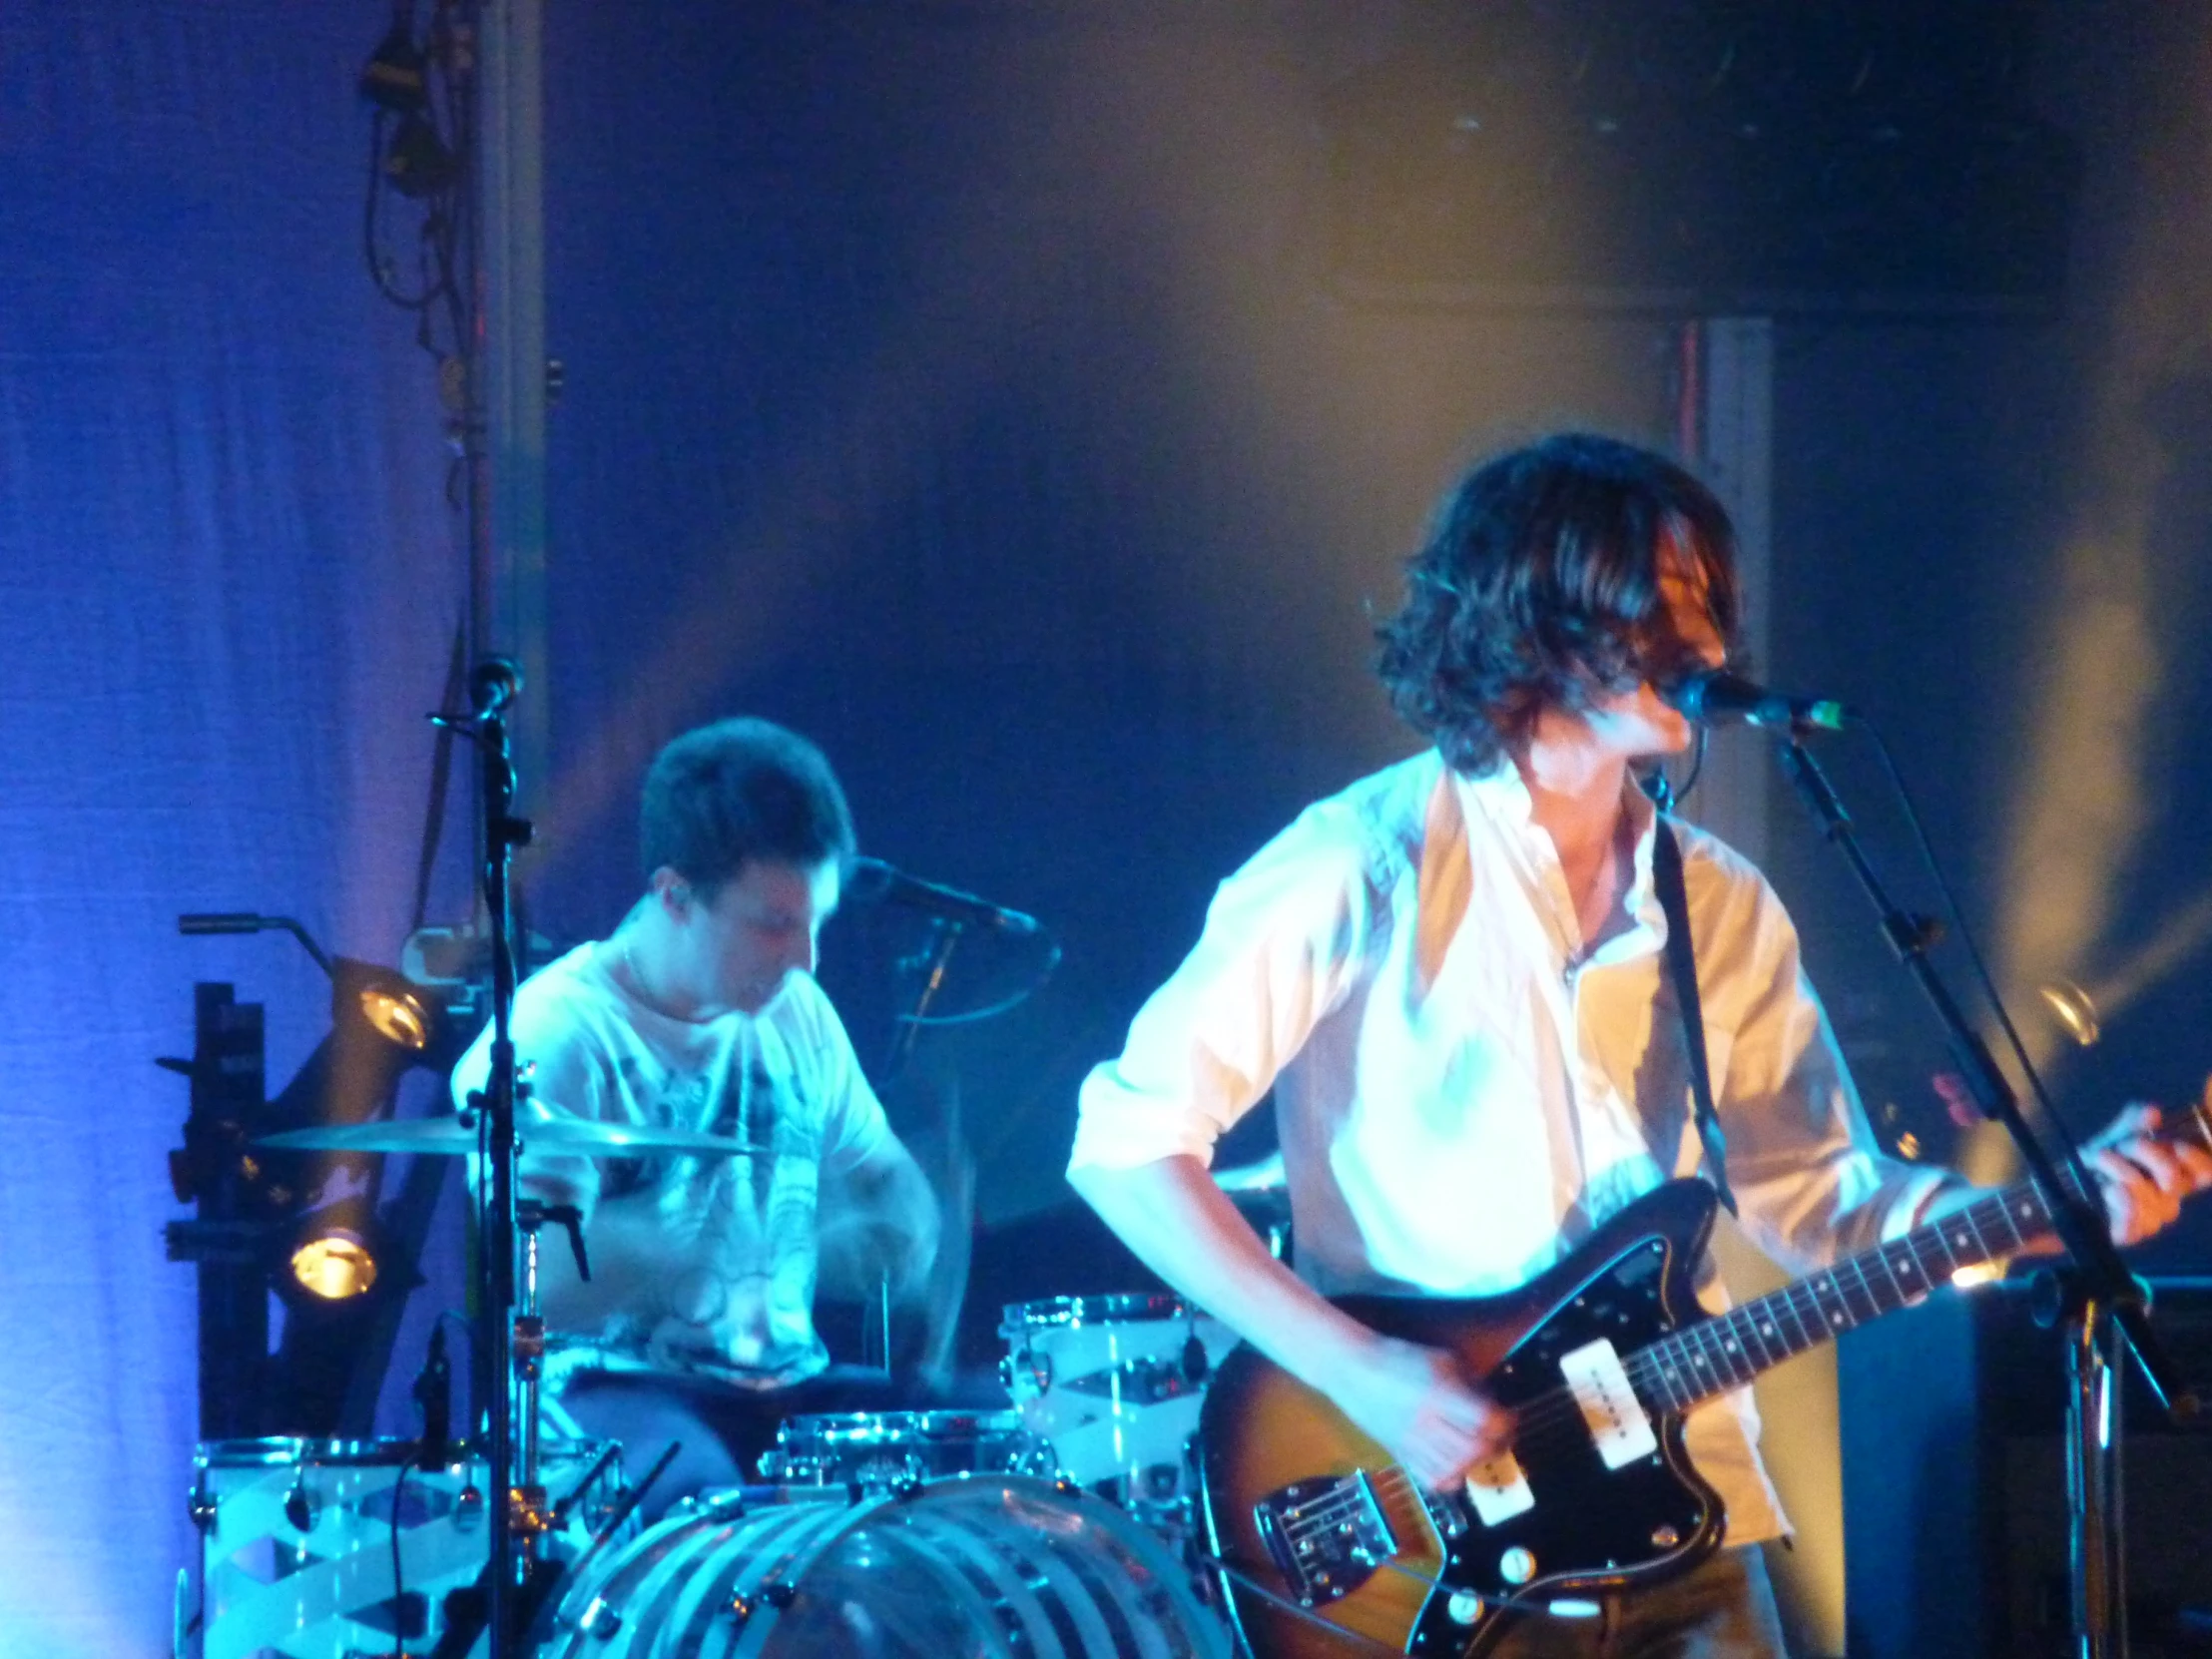 two young men playing guitar while another man in white shirt watches them